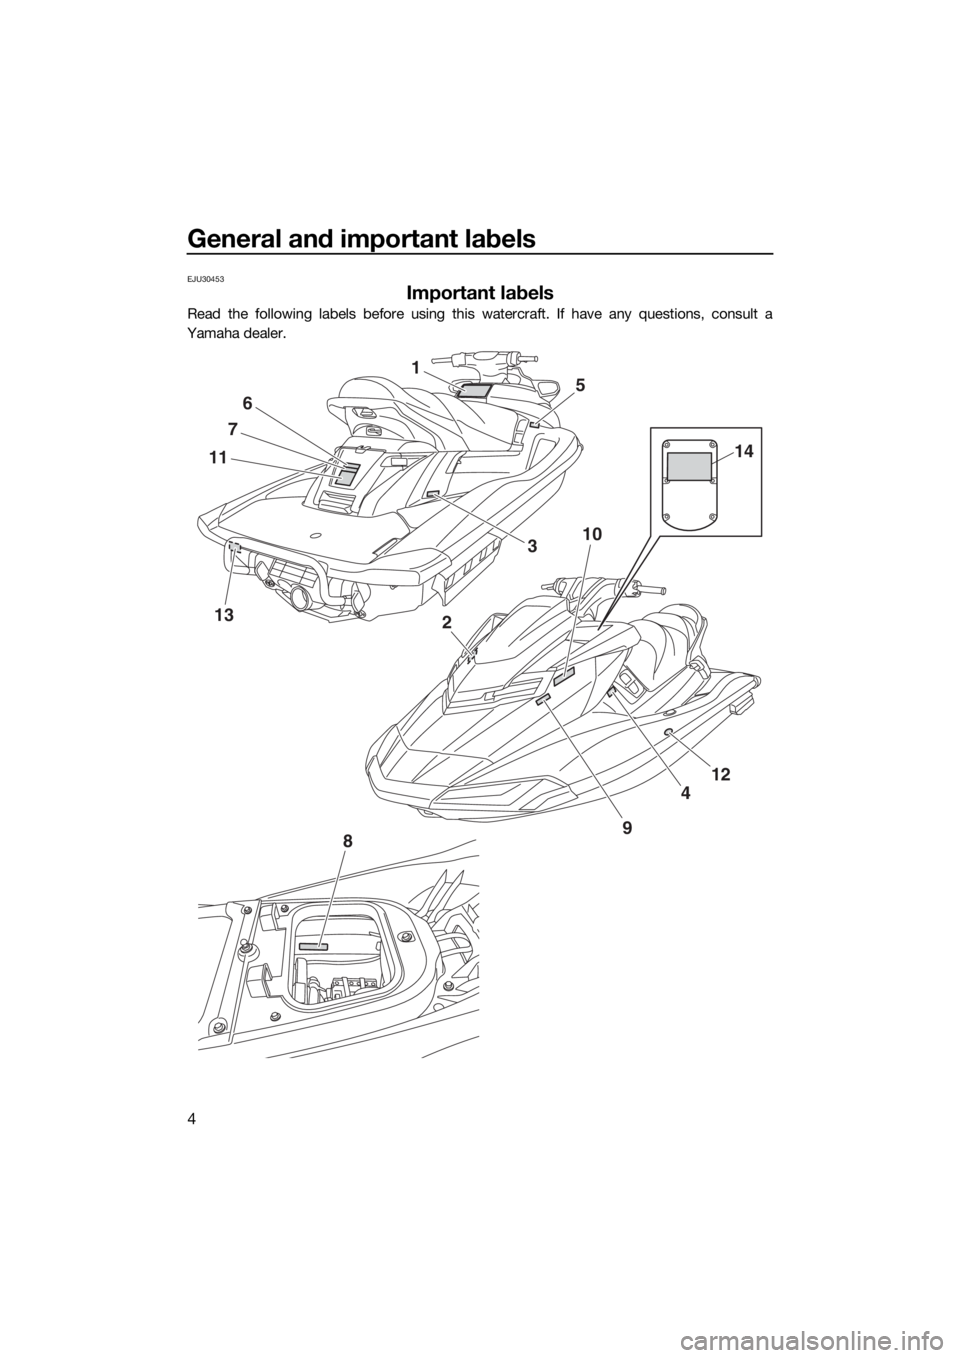 YAMAHA FX HO CRUISER 2016  Owners Manual General and important labels
4
EJU30453
Important labels
Read the following labels before using this watercraft. If have any questions, consult a
Yamaha dealer.
13
1
11
7
6
10
2
8
4
12
9
5
3
14
UF2T75